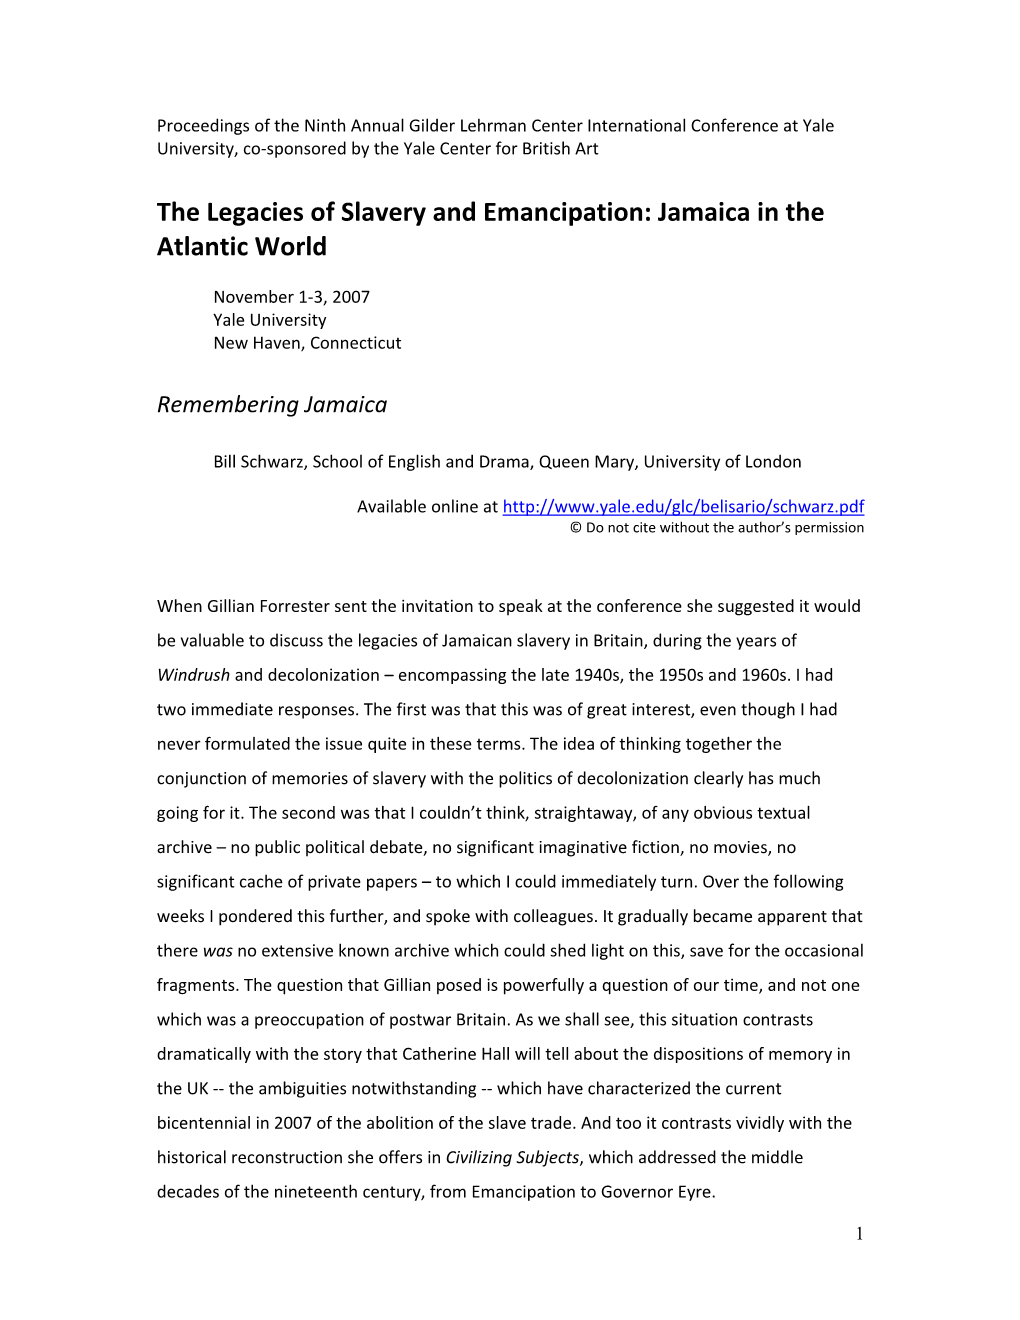 The Legacies of Slavery and Emancipation: Jamaica in the Atlantic World